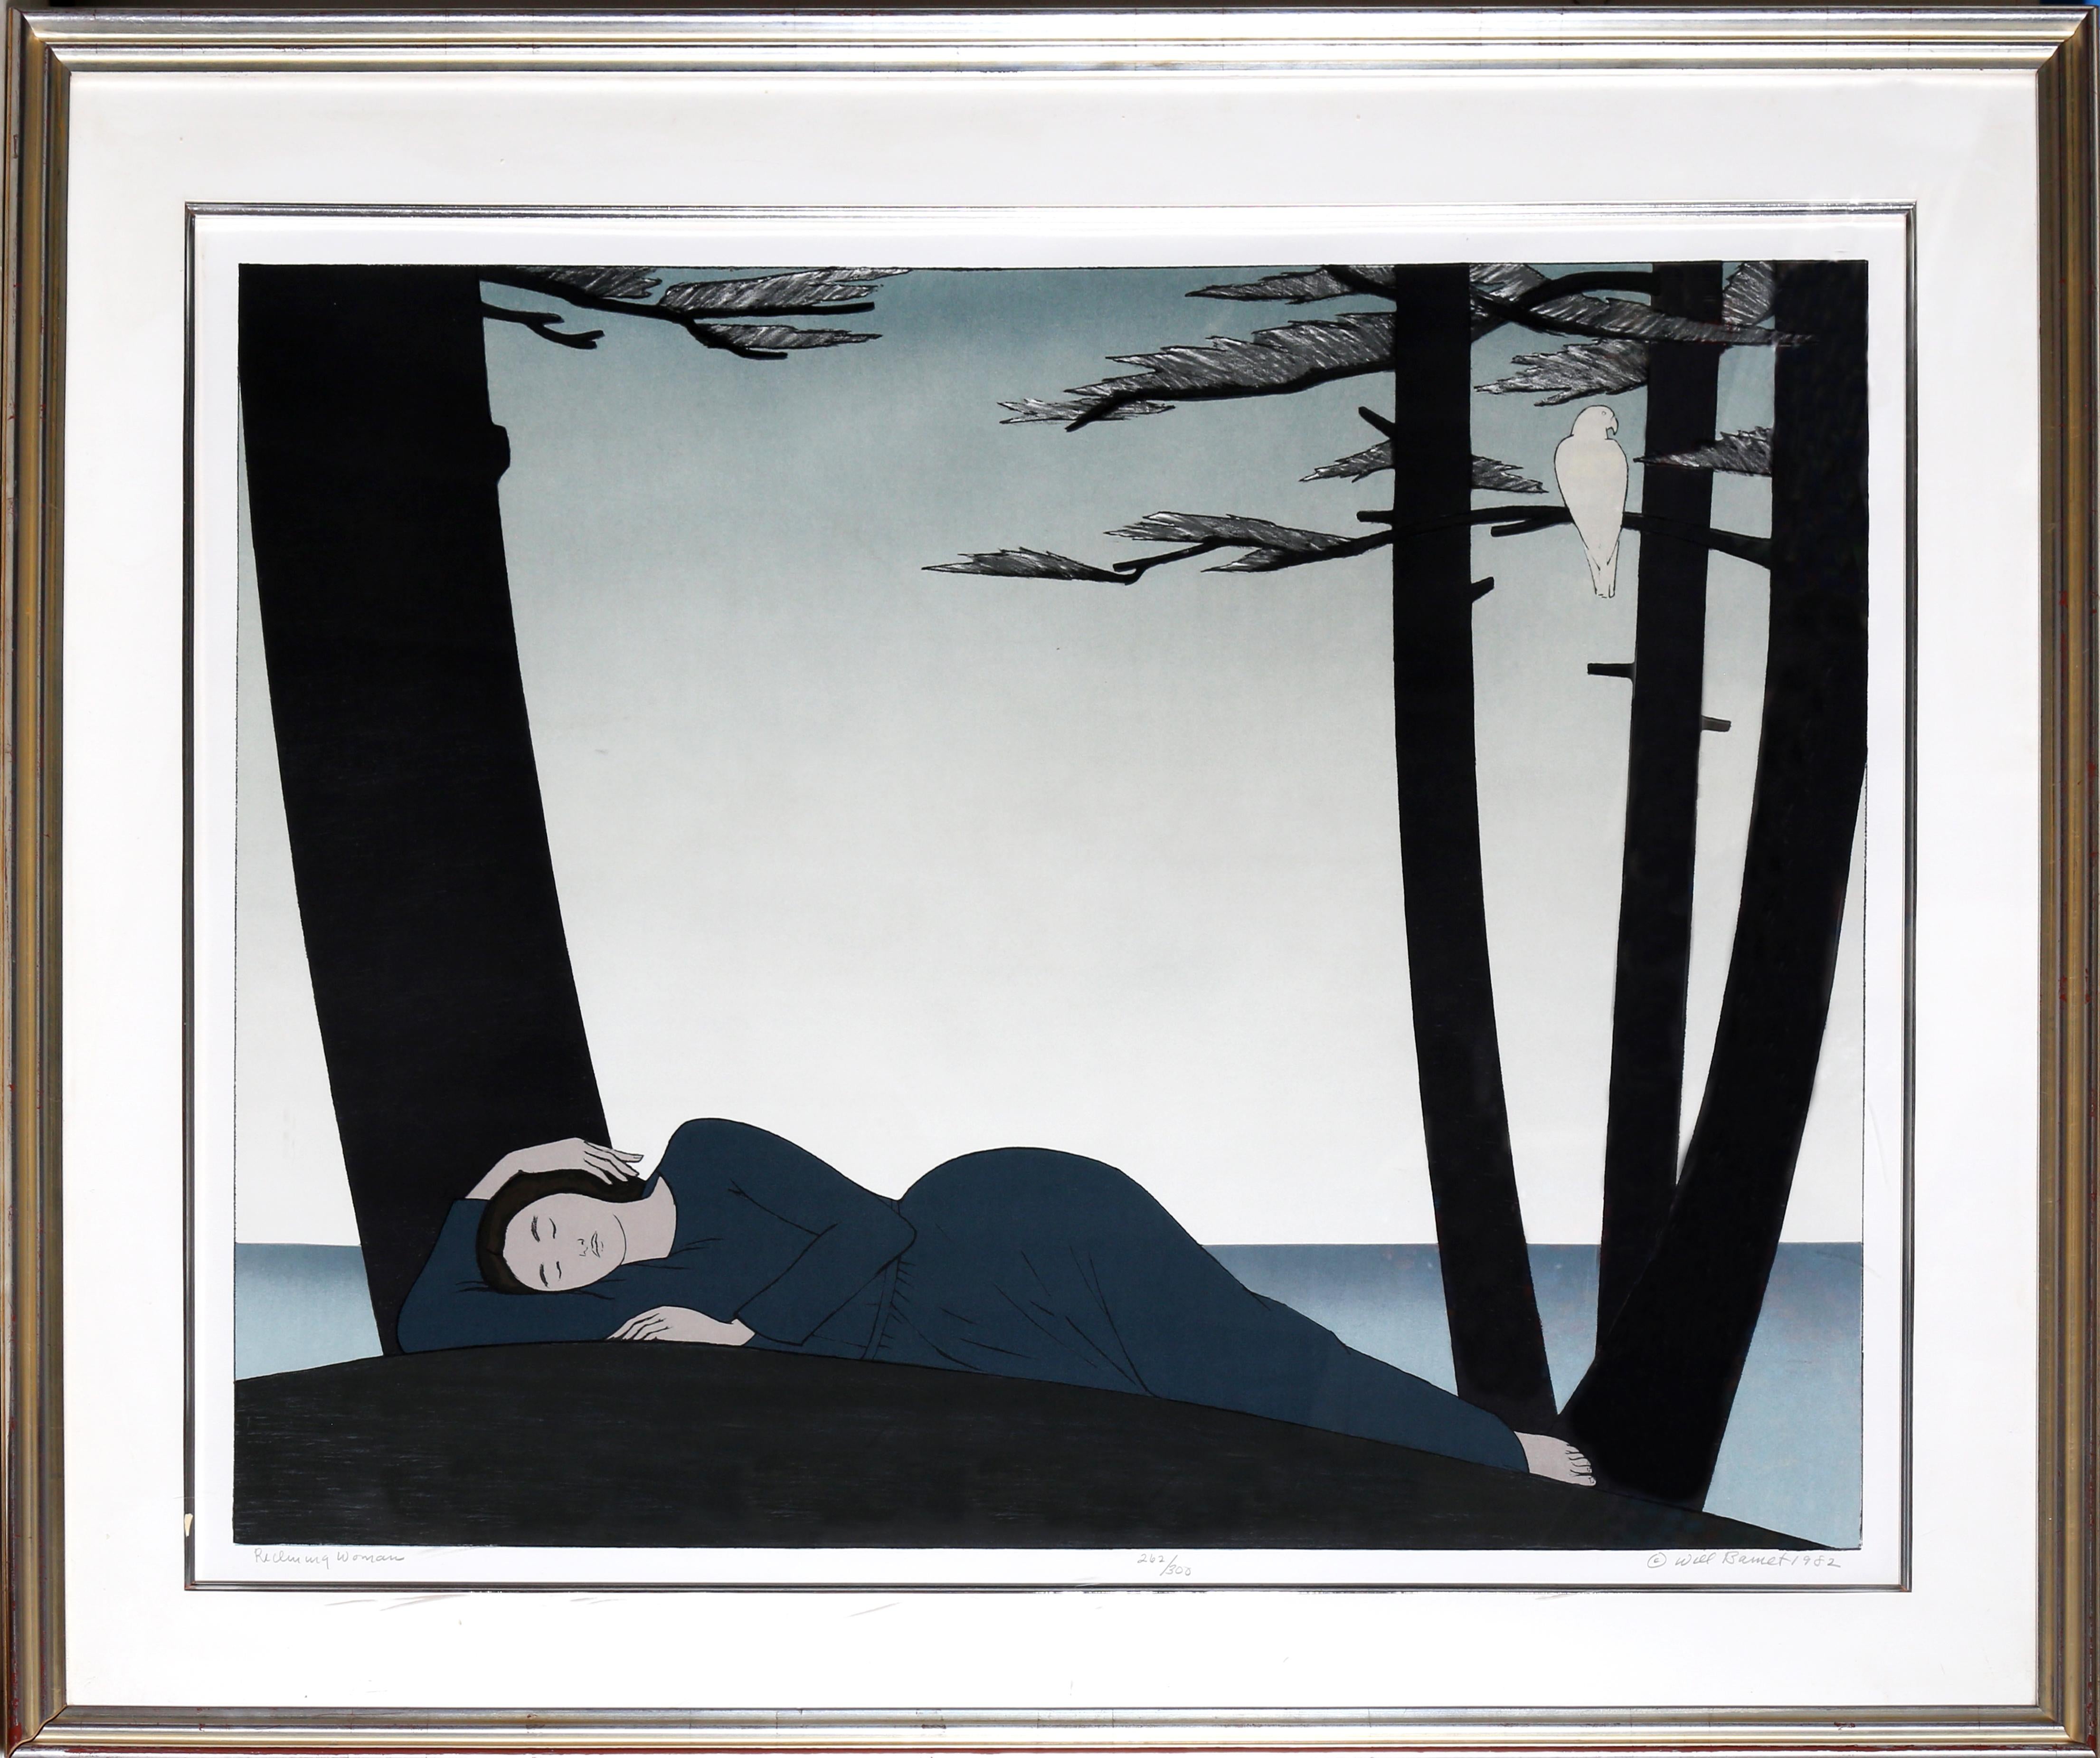 Artist: Will Barnet, American (1911 - 2012)
Title: Reclining Woman
Year: 1982
Medium: Lithograph on Arches, signed and numbered in pencil
Edition: 262/300
Image: 29.5 x 37.5 inches
Size: 29.75 x 38 in. (75.57 x 96.52 cm)
Frame Size: 40.5 x 48